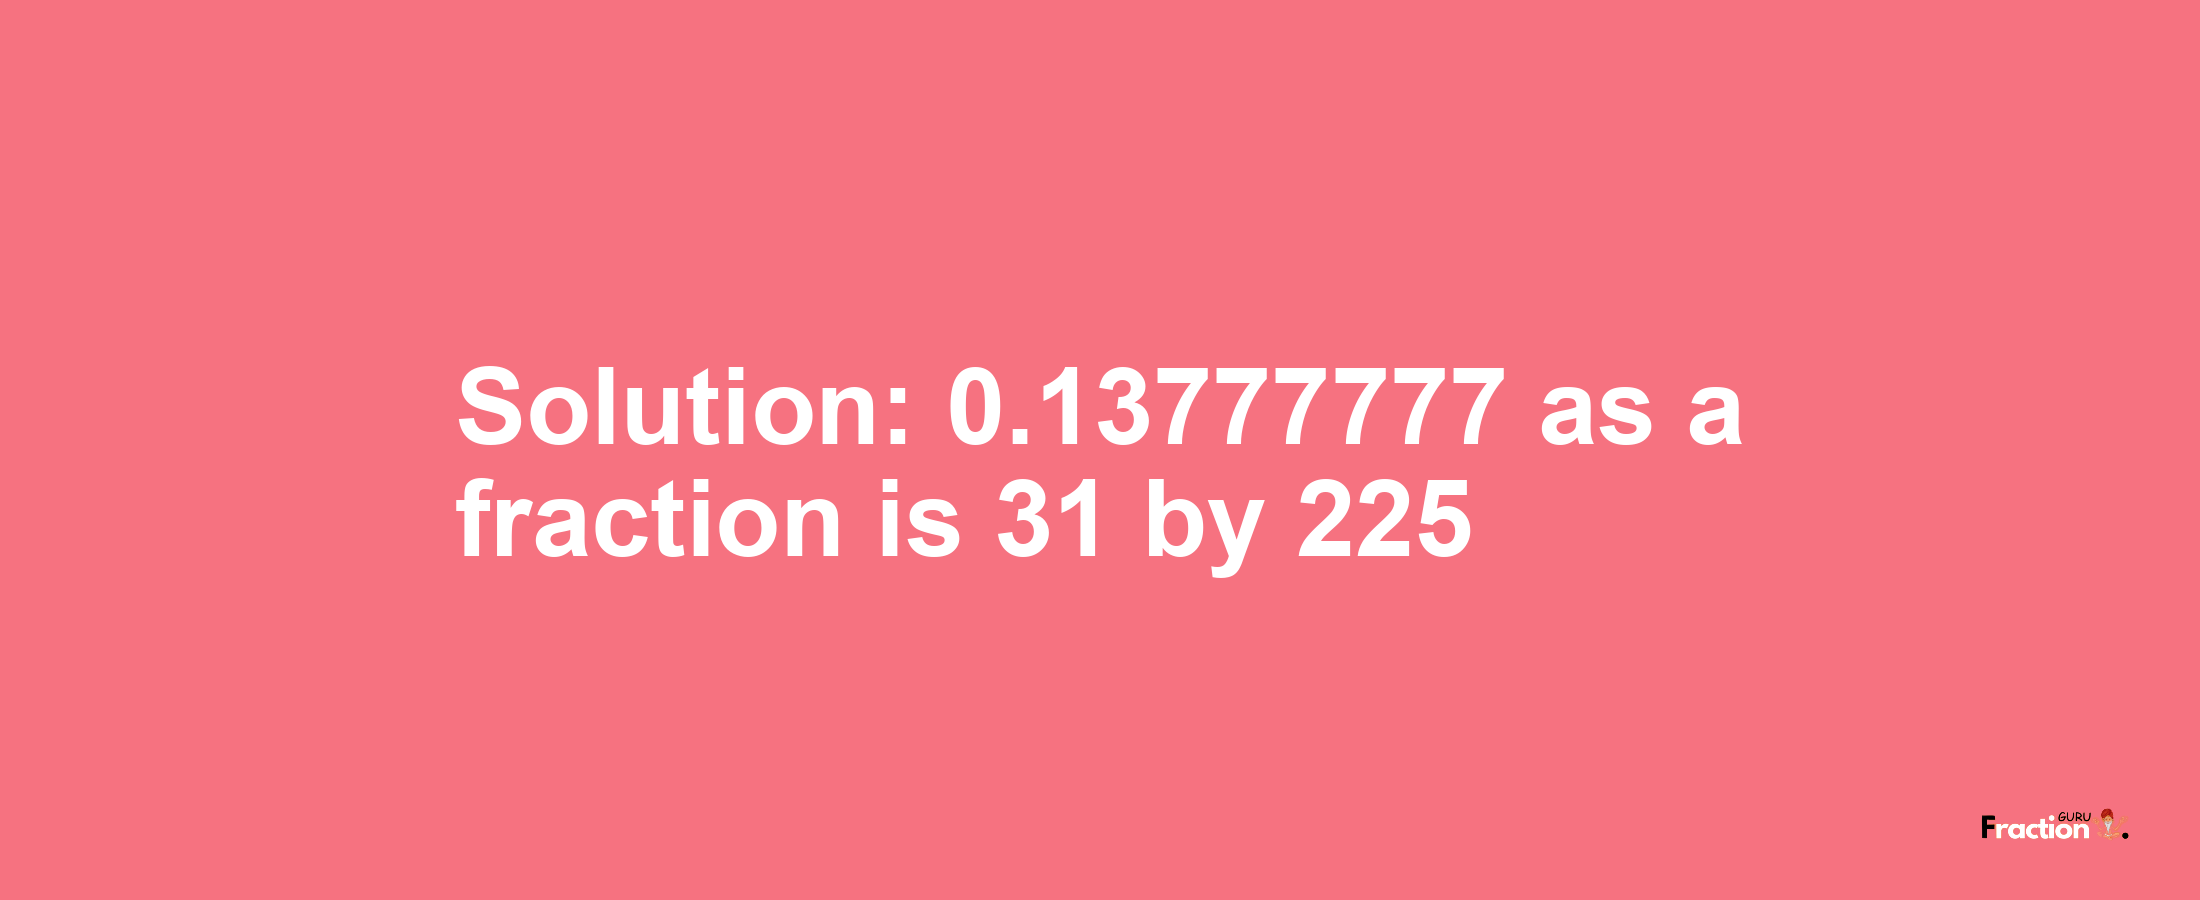 Solution:0.13777777 as a fraction is 31/225